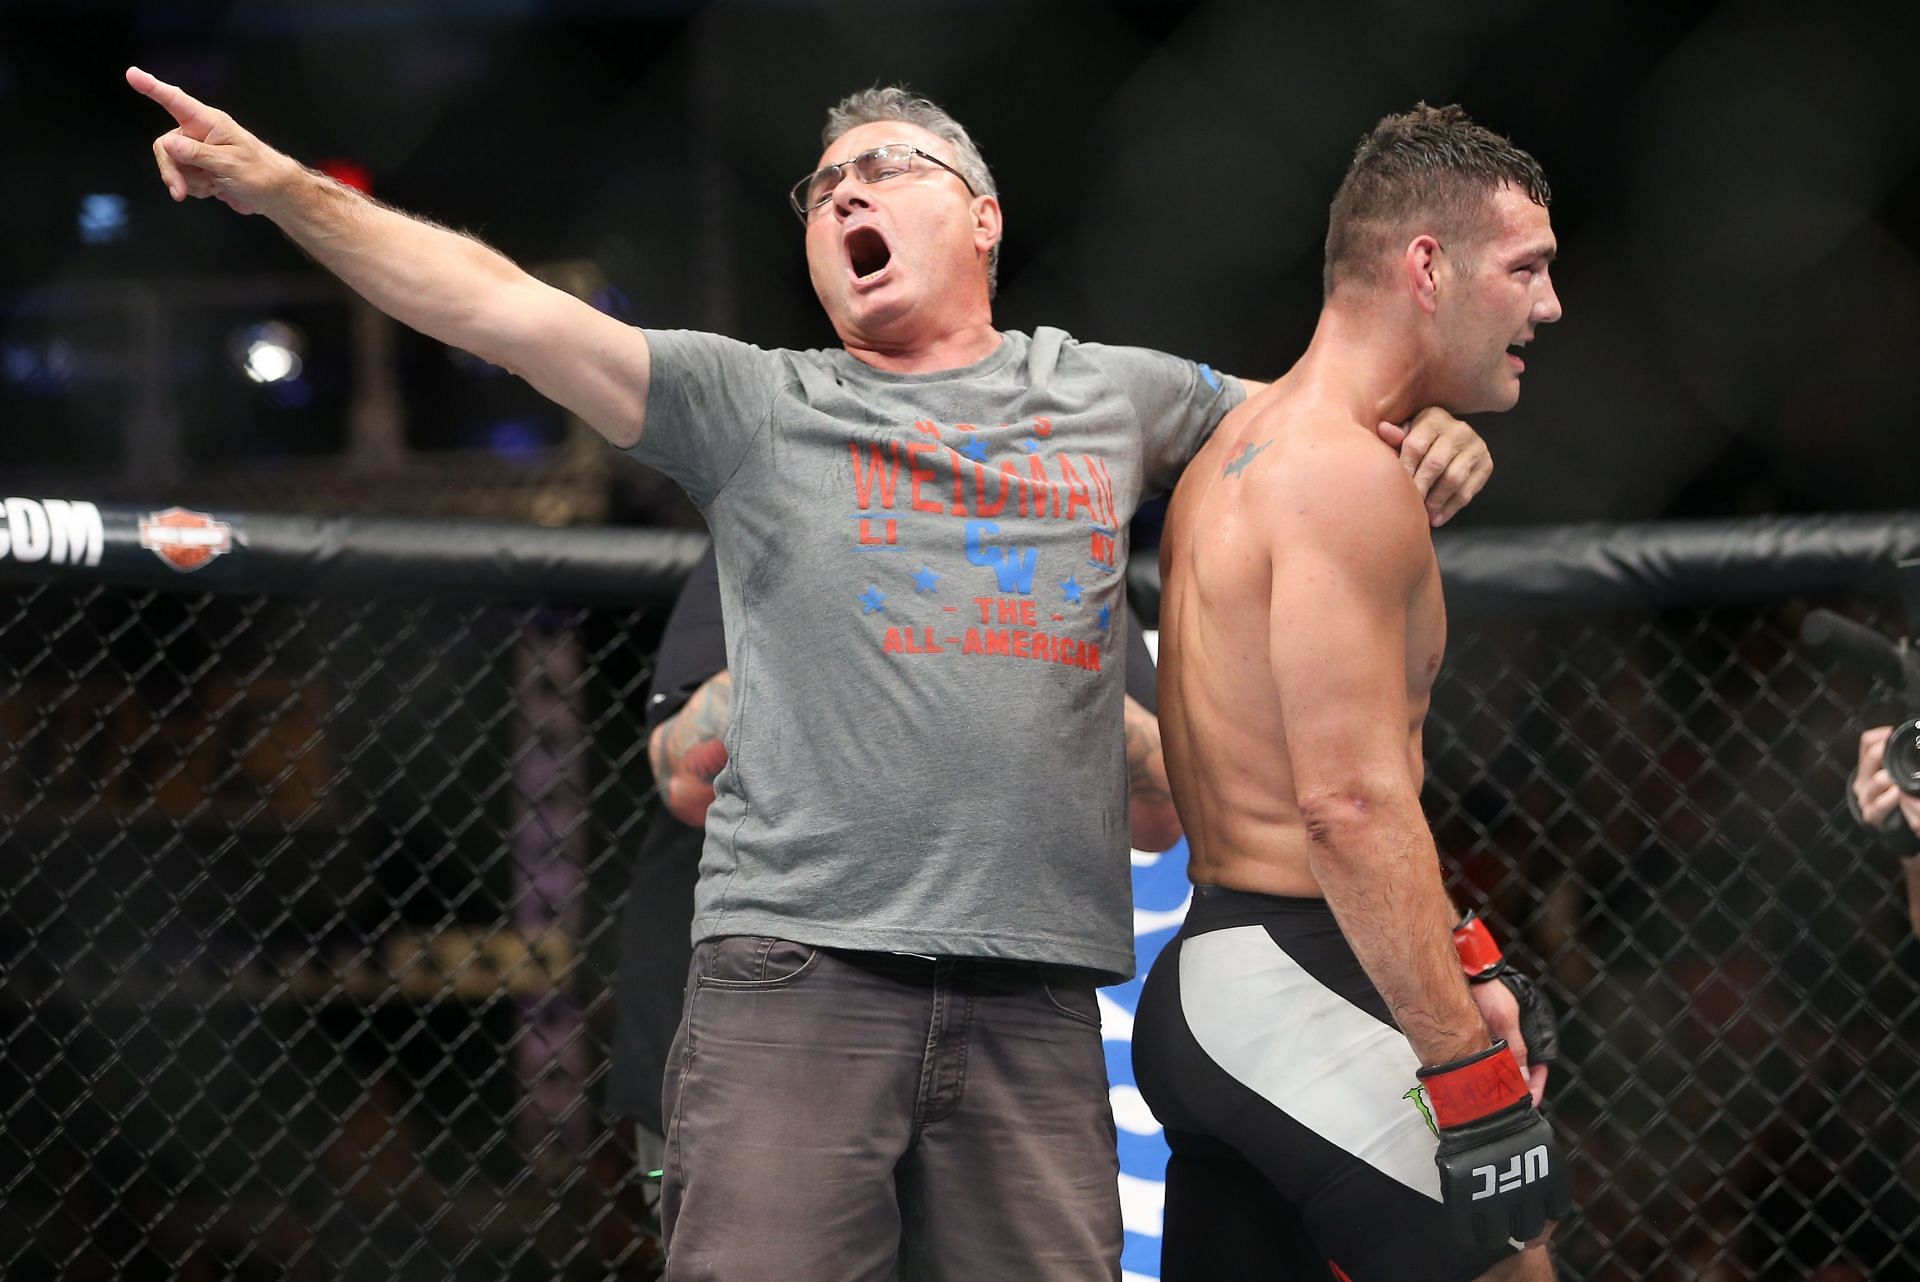 Chris Weidman shocked the world by beating Anderson Silva in 2013